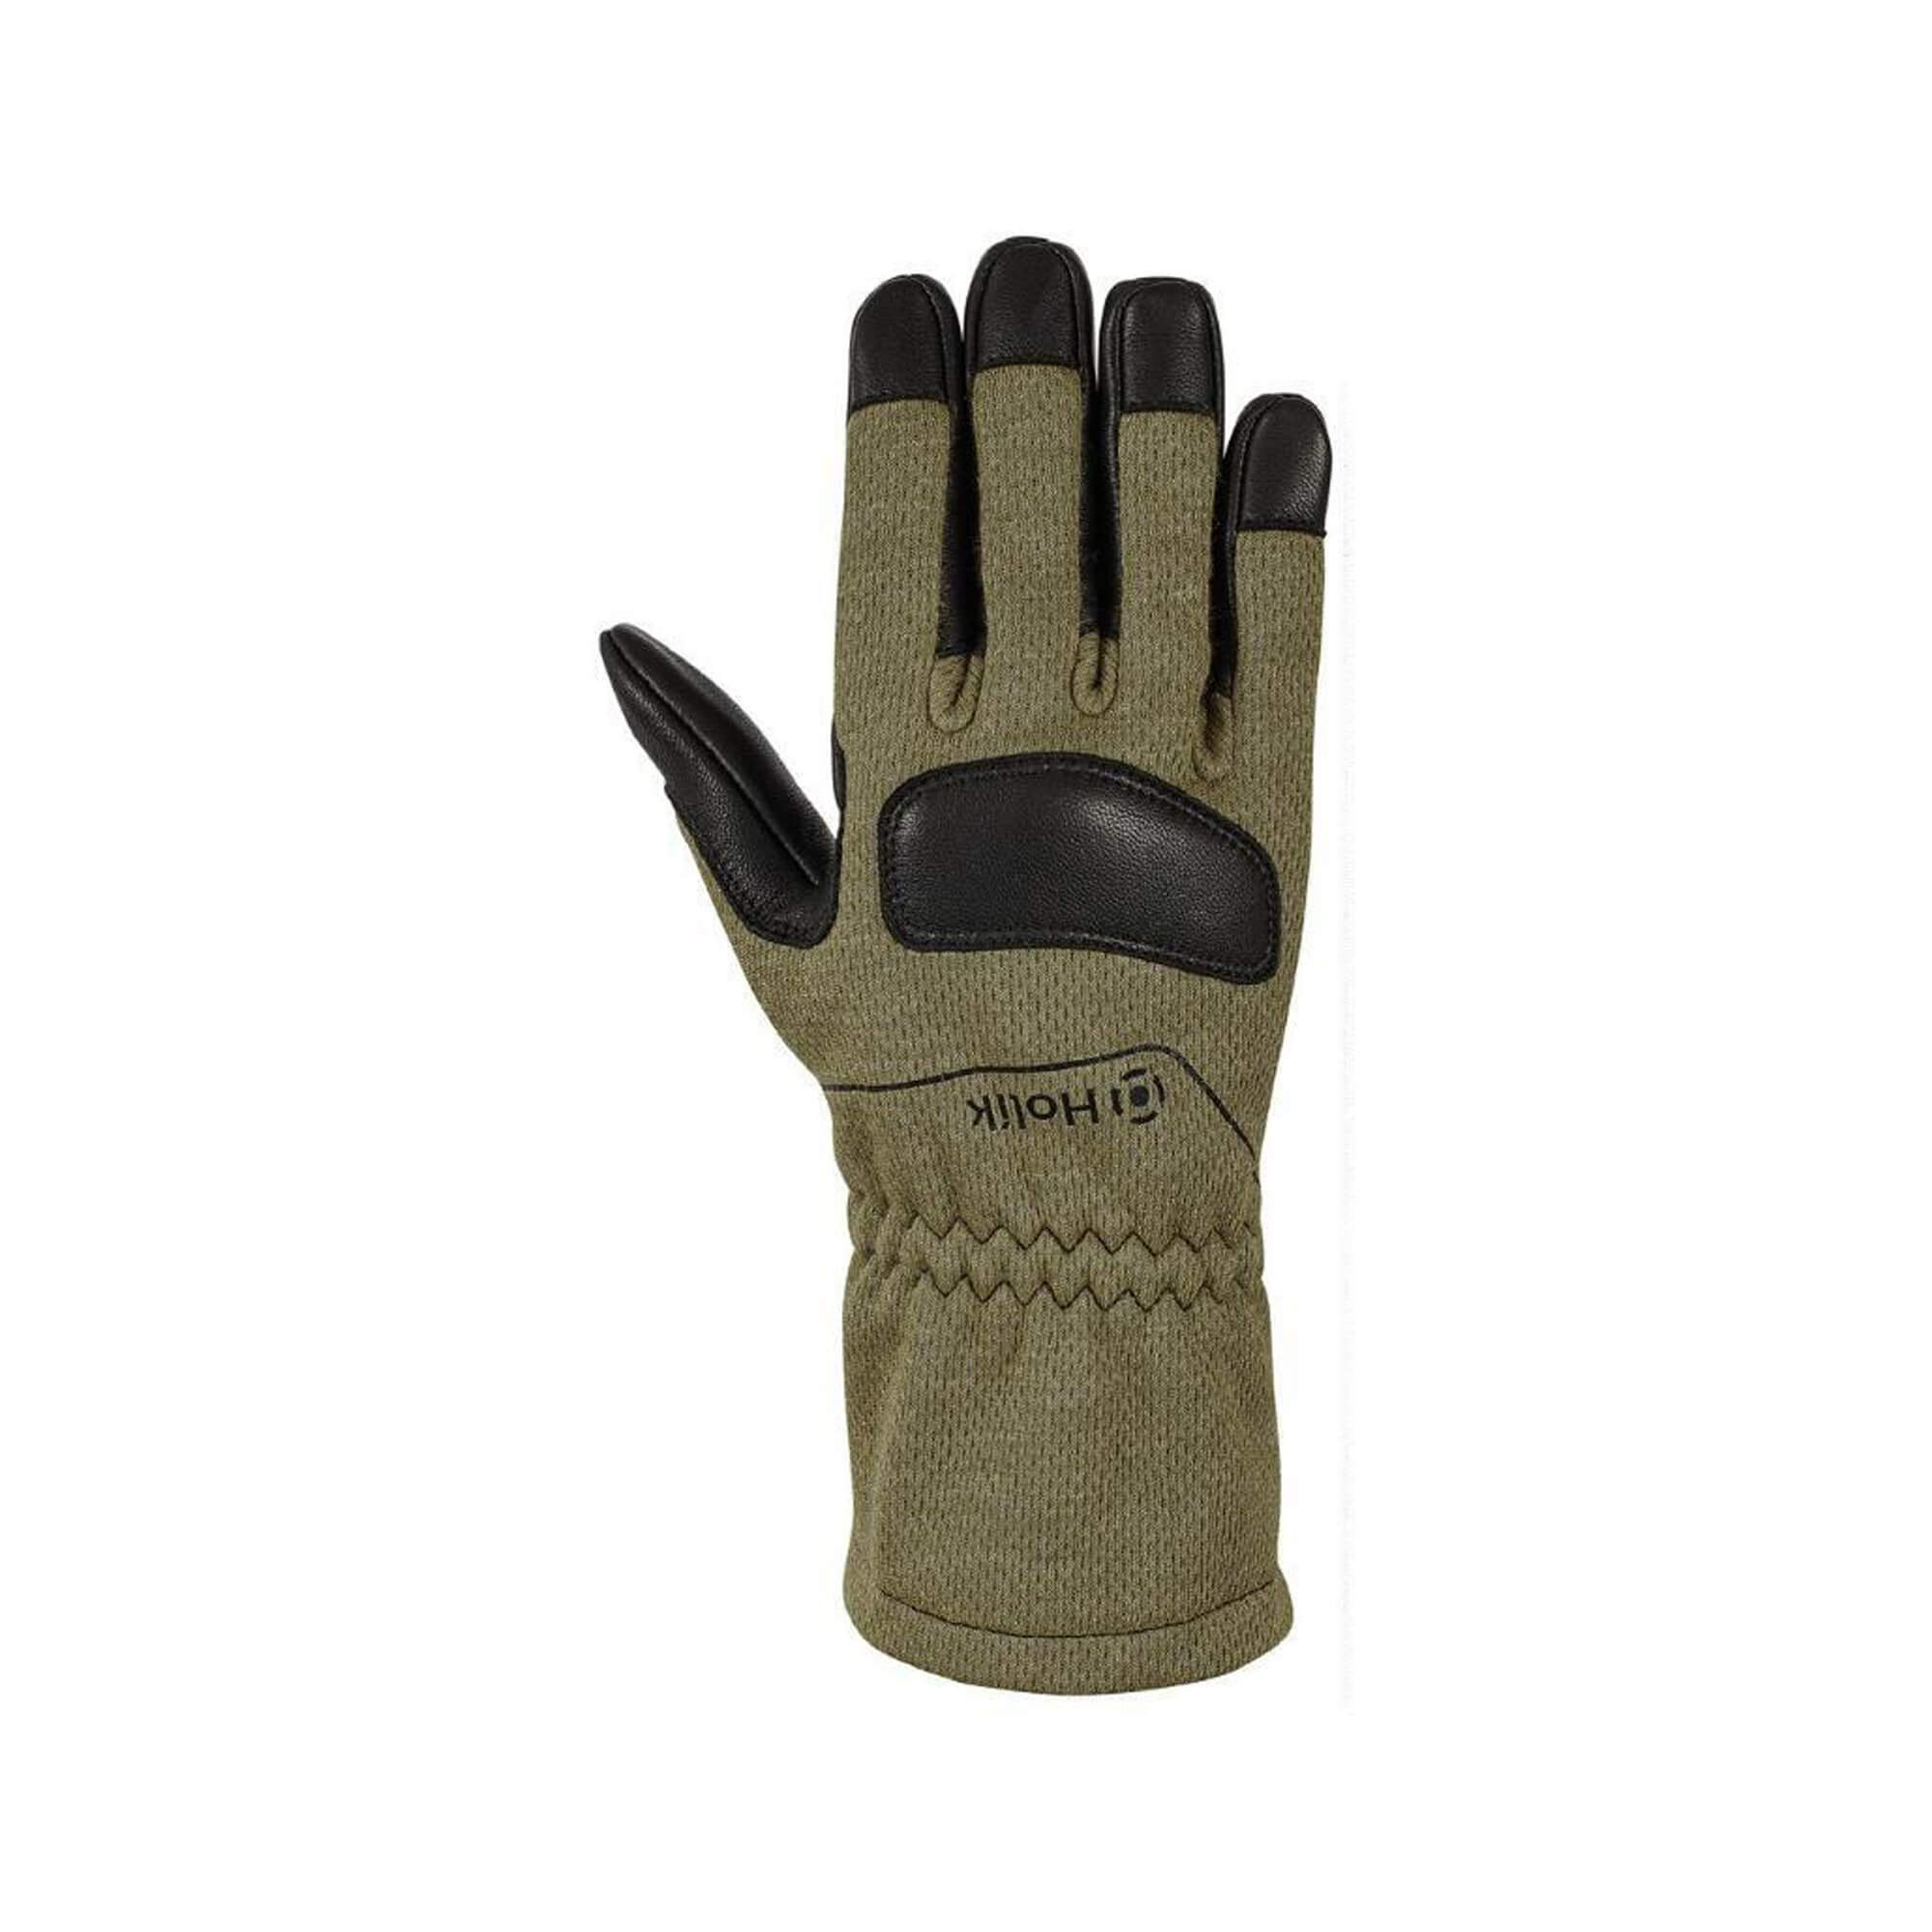 Emergency gloves for Firefighters and Rescuers Foresta